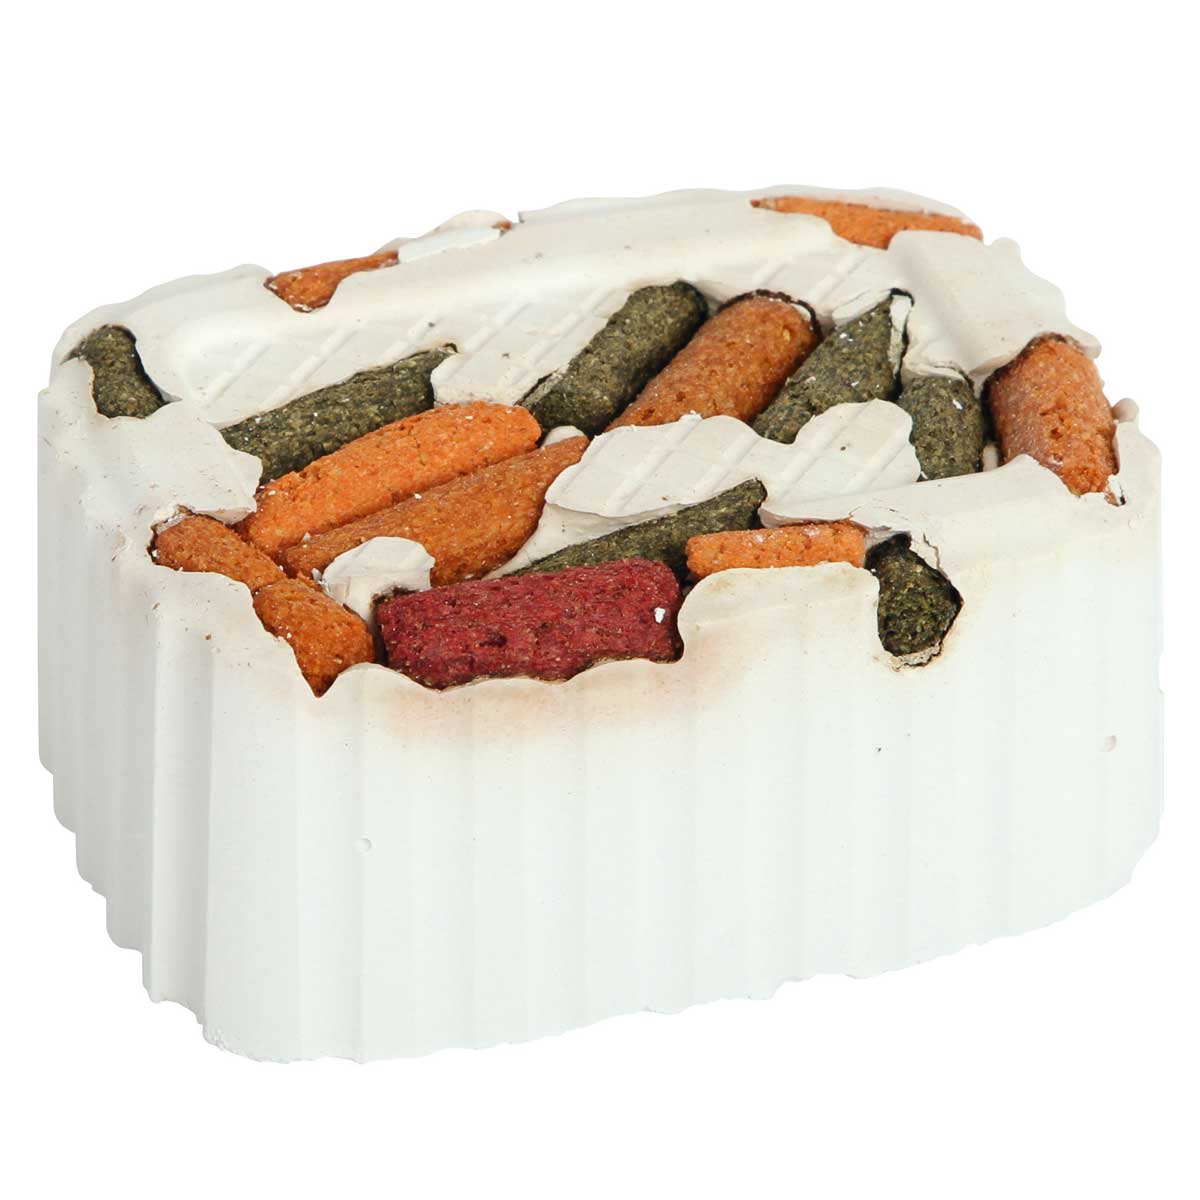 Mineral lick stone for rodents with vegetables ca. 210 g